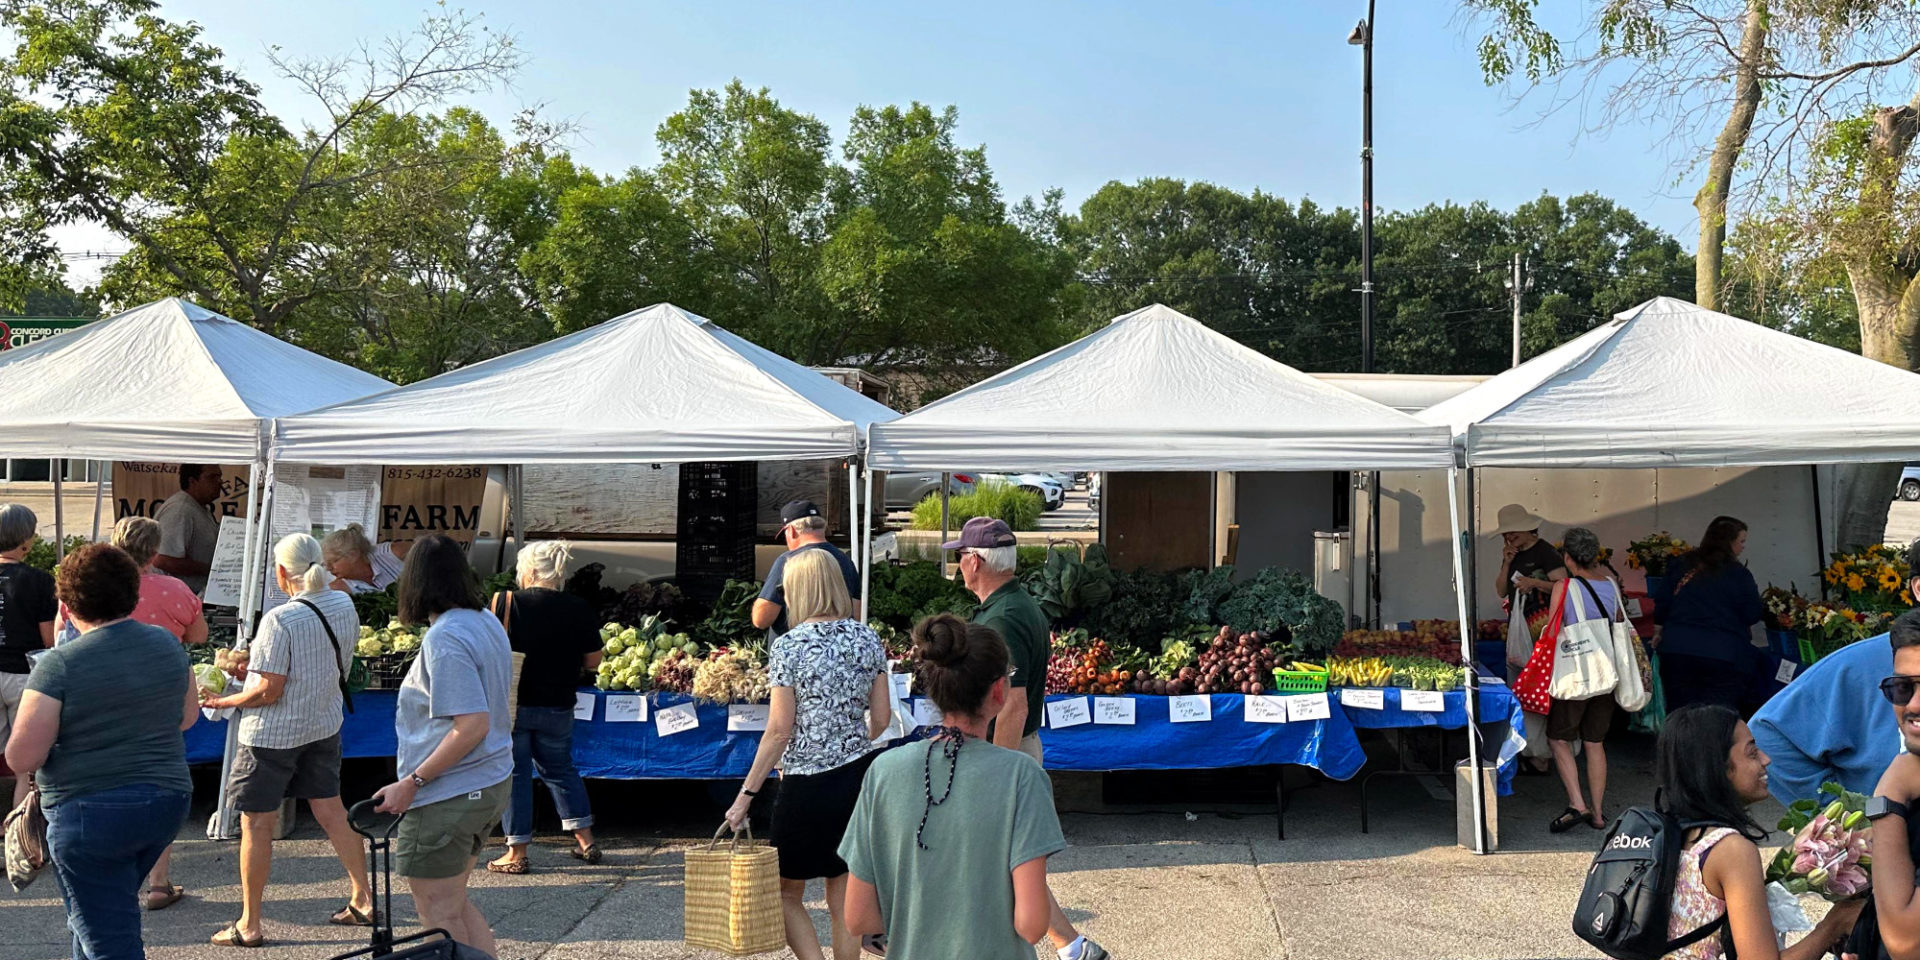 A row of four white tents span the southwest corner of the Urbana market. Under the tents are several tables piled high with fruits and vegetables from Moore Family Farm. In the tent all the way to the right, there are bushels of freshly cut flowers. In the tent all the way to the left, Wes Moore stands behind a cash register and speaks to his mother, Diann, as she stocks produce. Photo by Photo by Jake Williams.